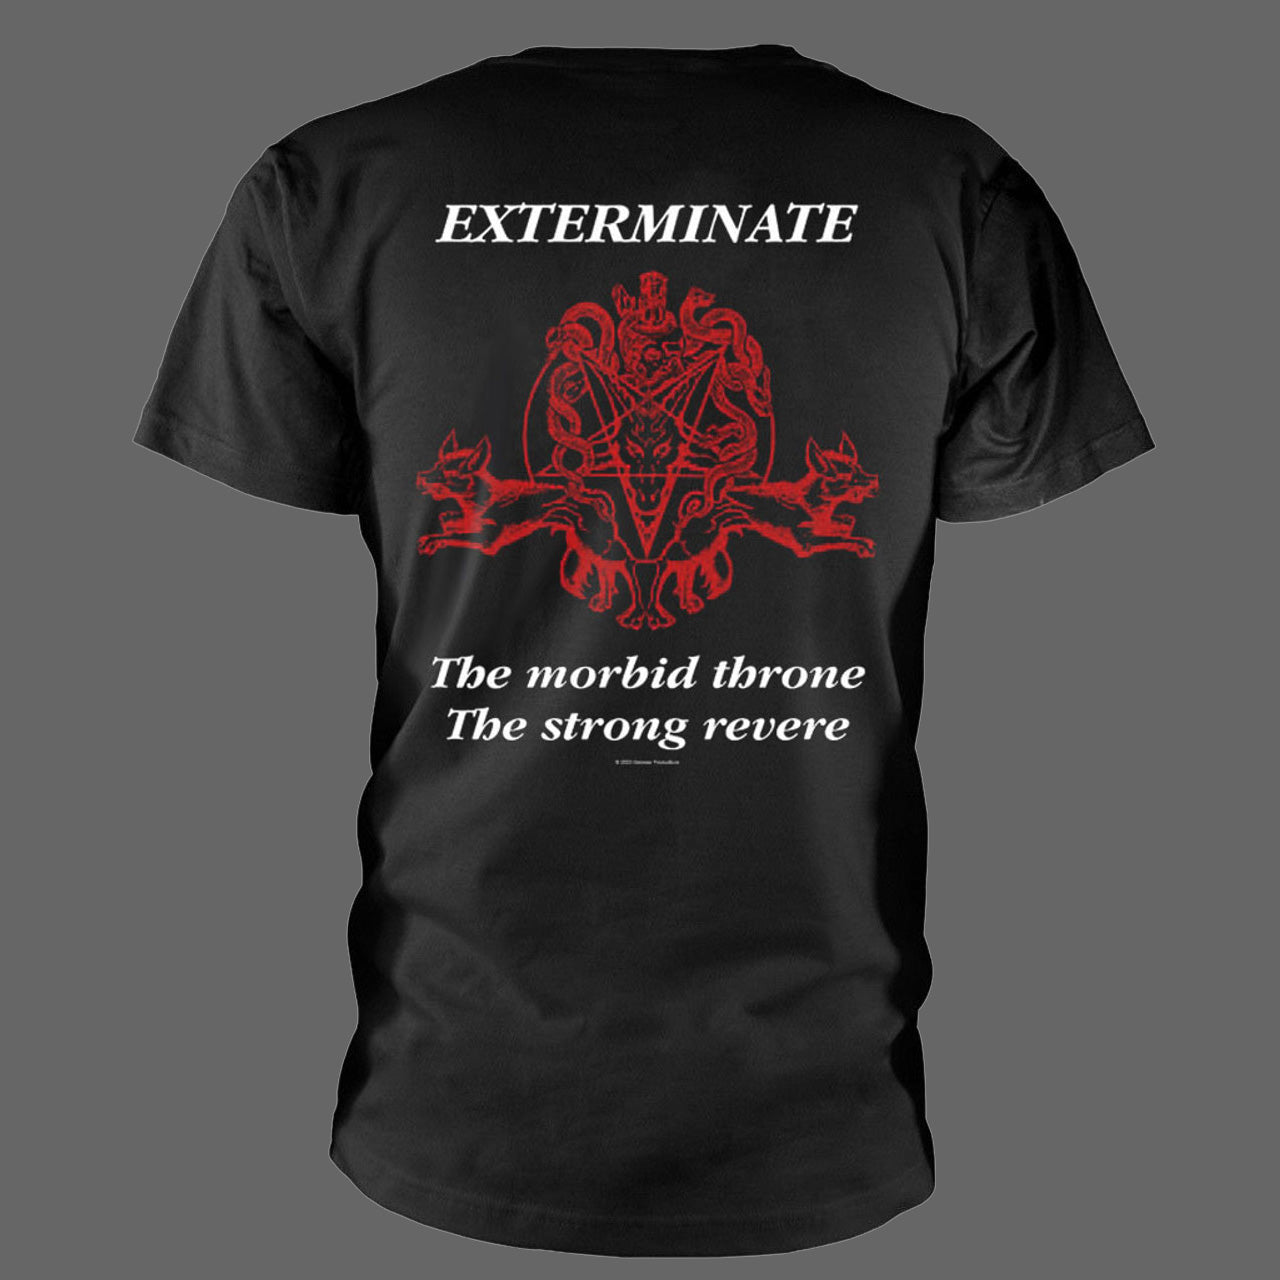 Angelcorpse - Exterminate (T-Shirt)